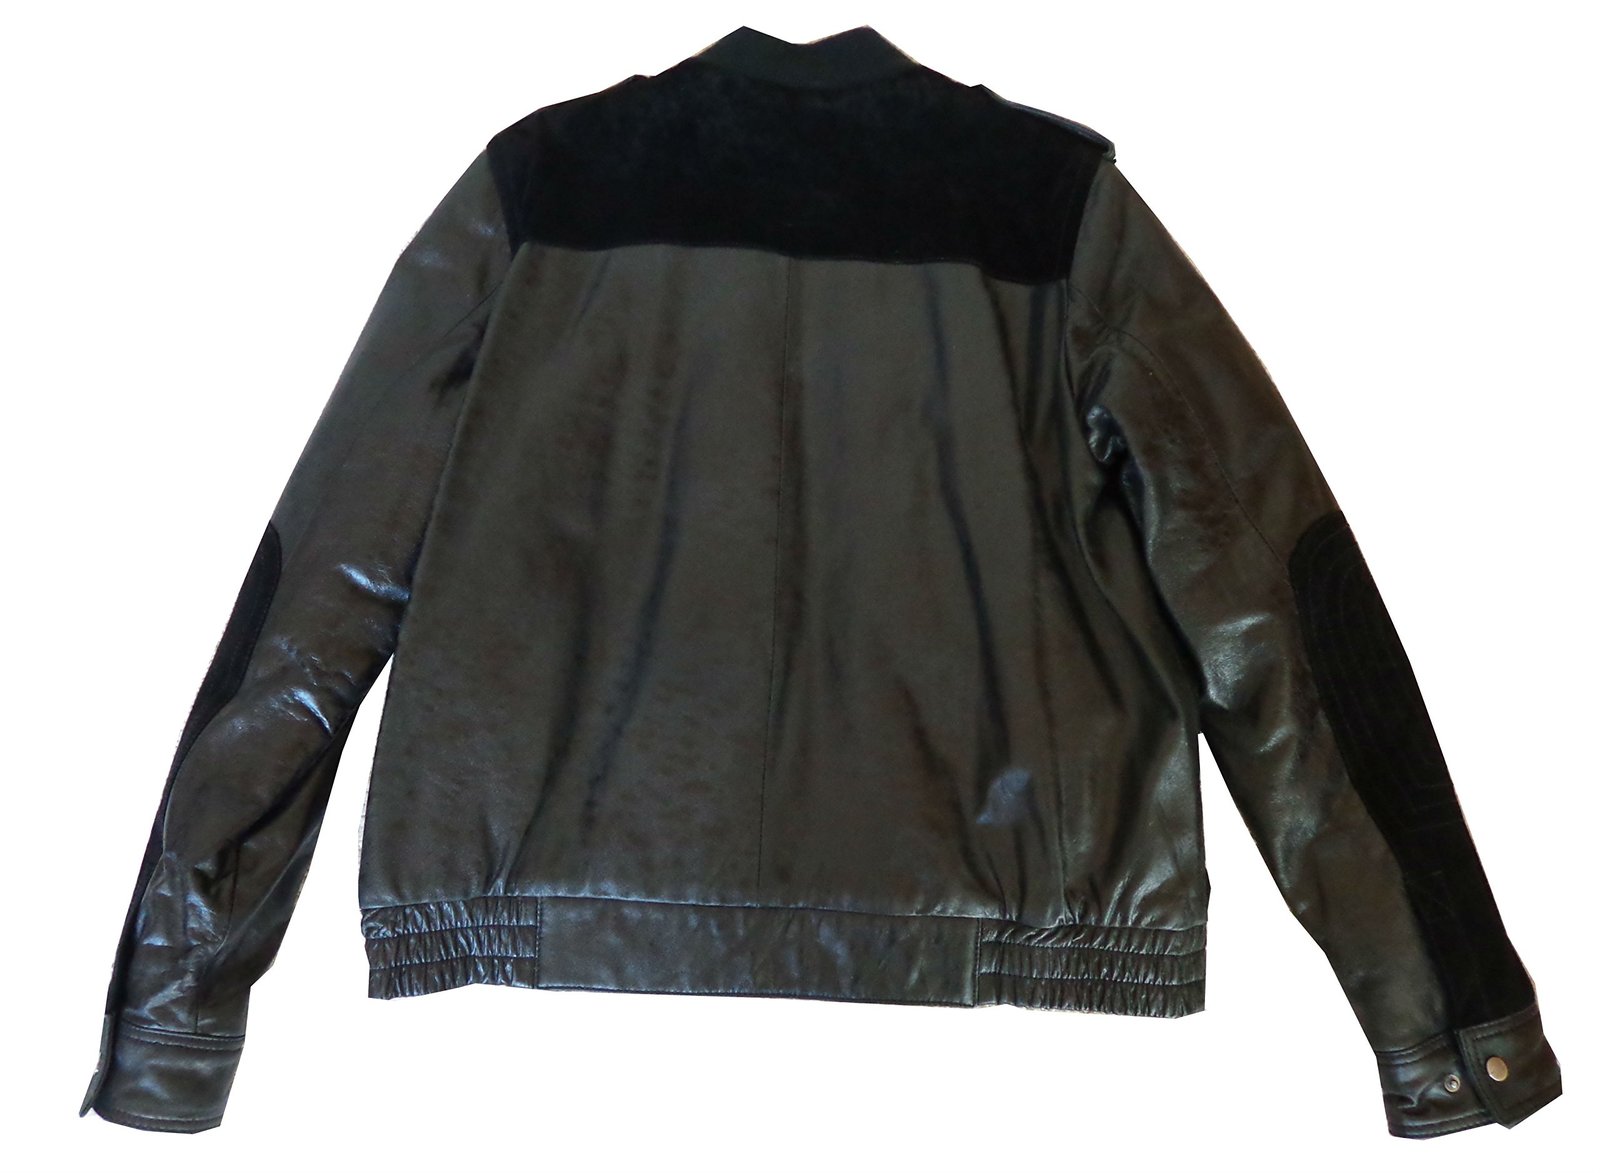 Sean John Mens Leather Jackets Clearance Sale - Outerwear